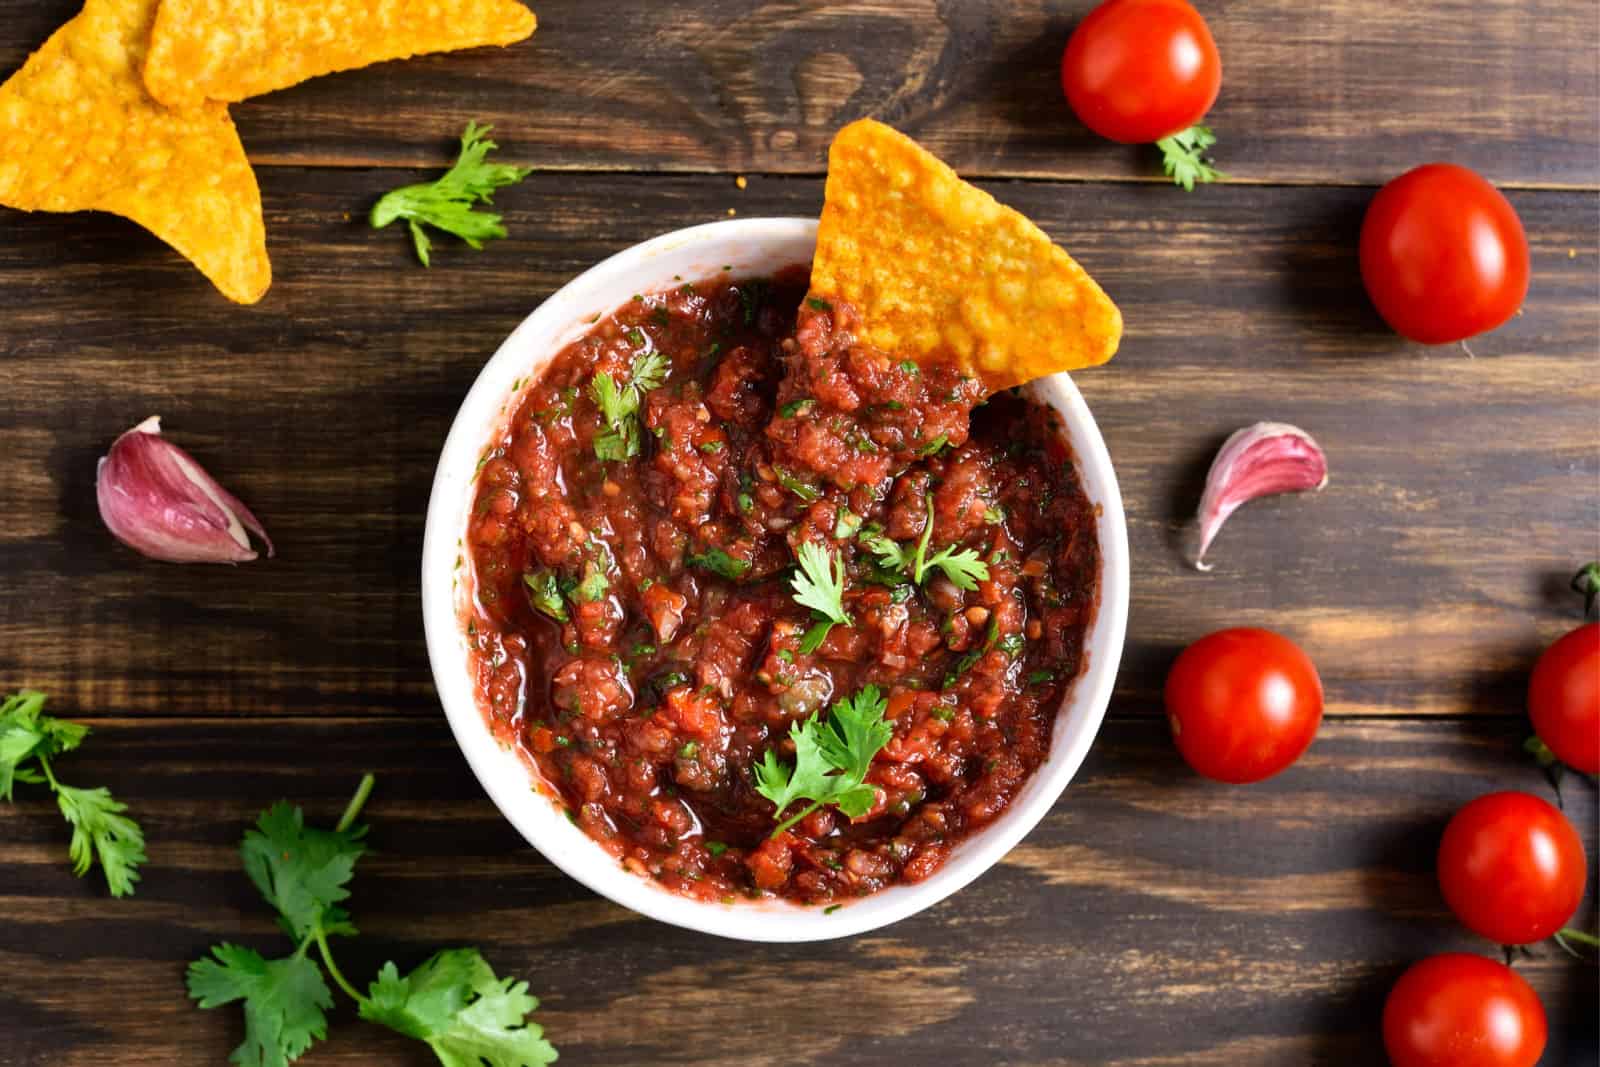 Homemade tomato salsa in bowl over wooden background